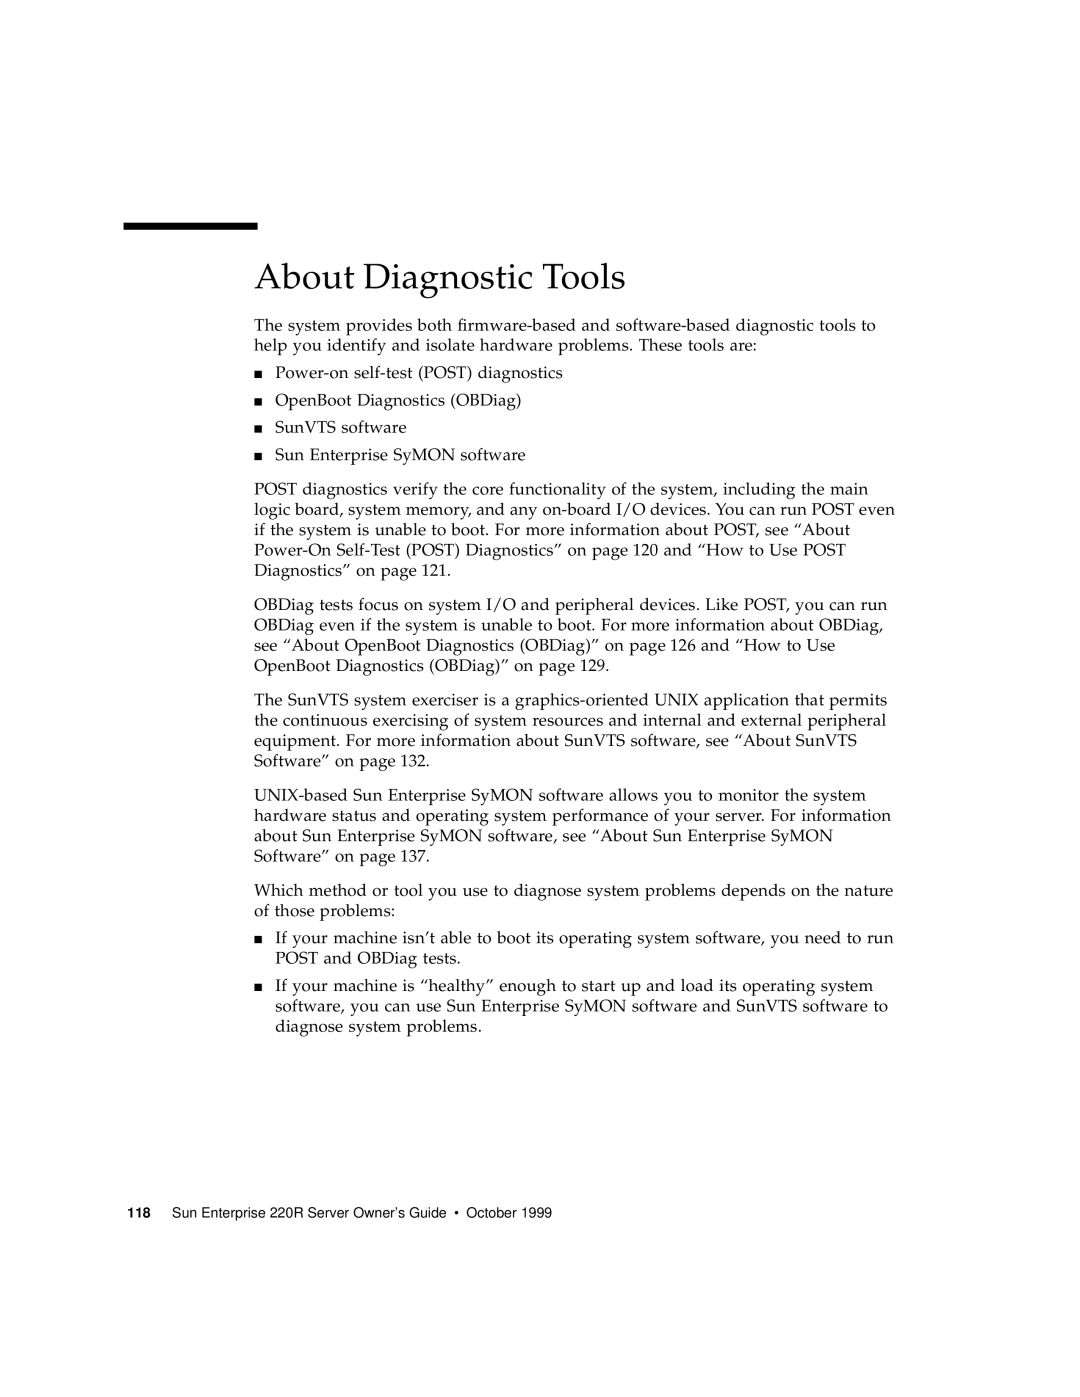 Sun Microsystems 220R manual About Diagnostic Tools 